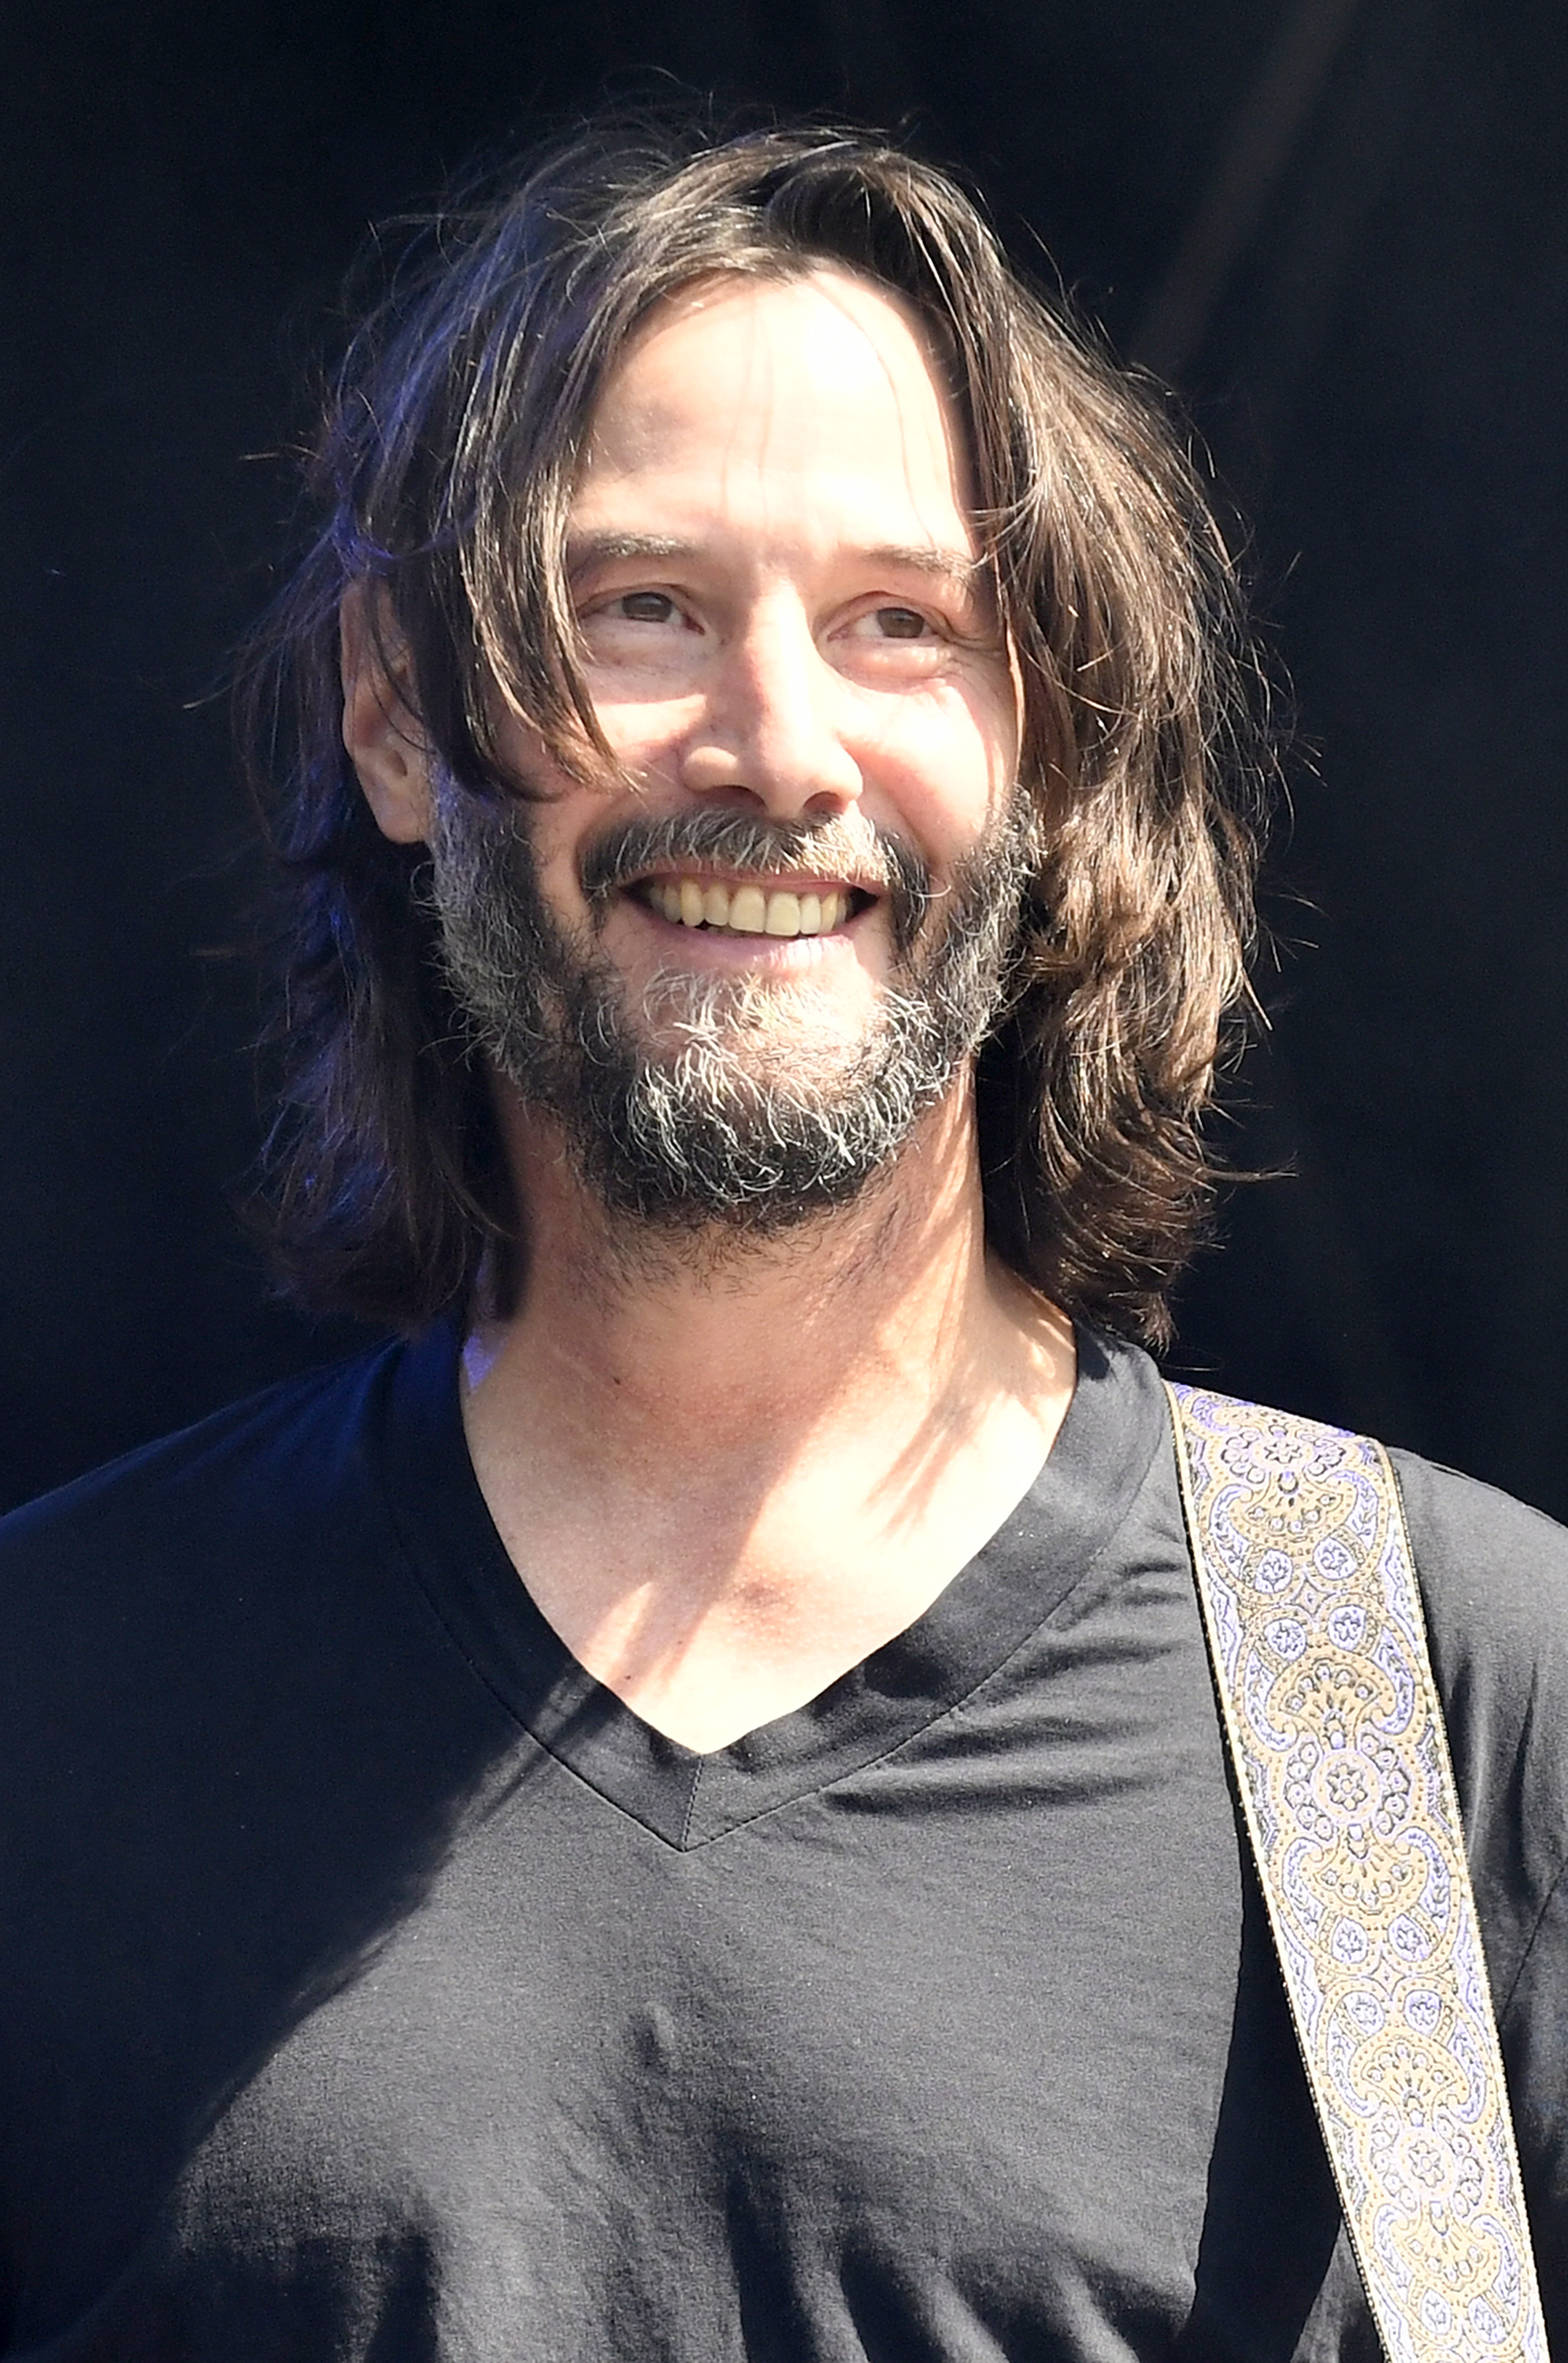 Keanu Reeves performing at the BottleRock Napa Valley festival in Napa, California on May 27, 2023 | Source: Getty Images